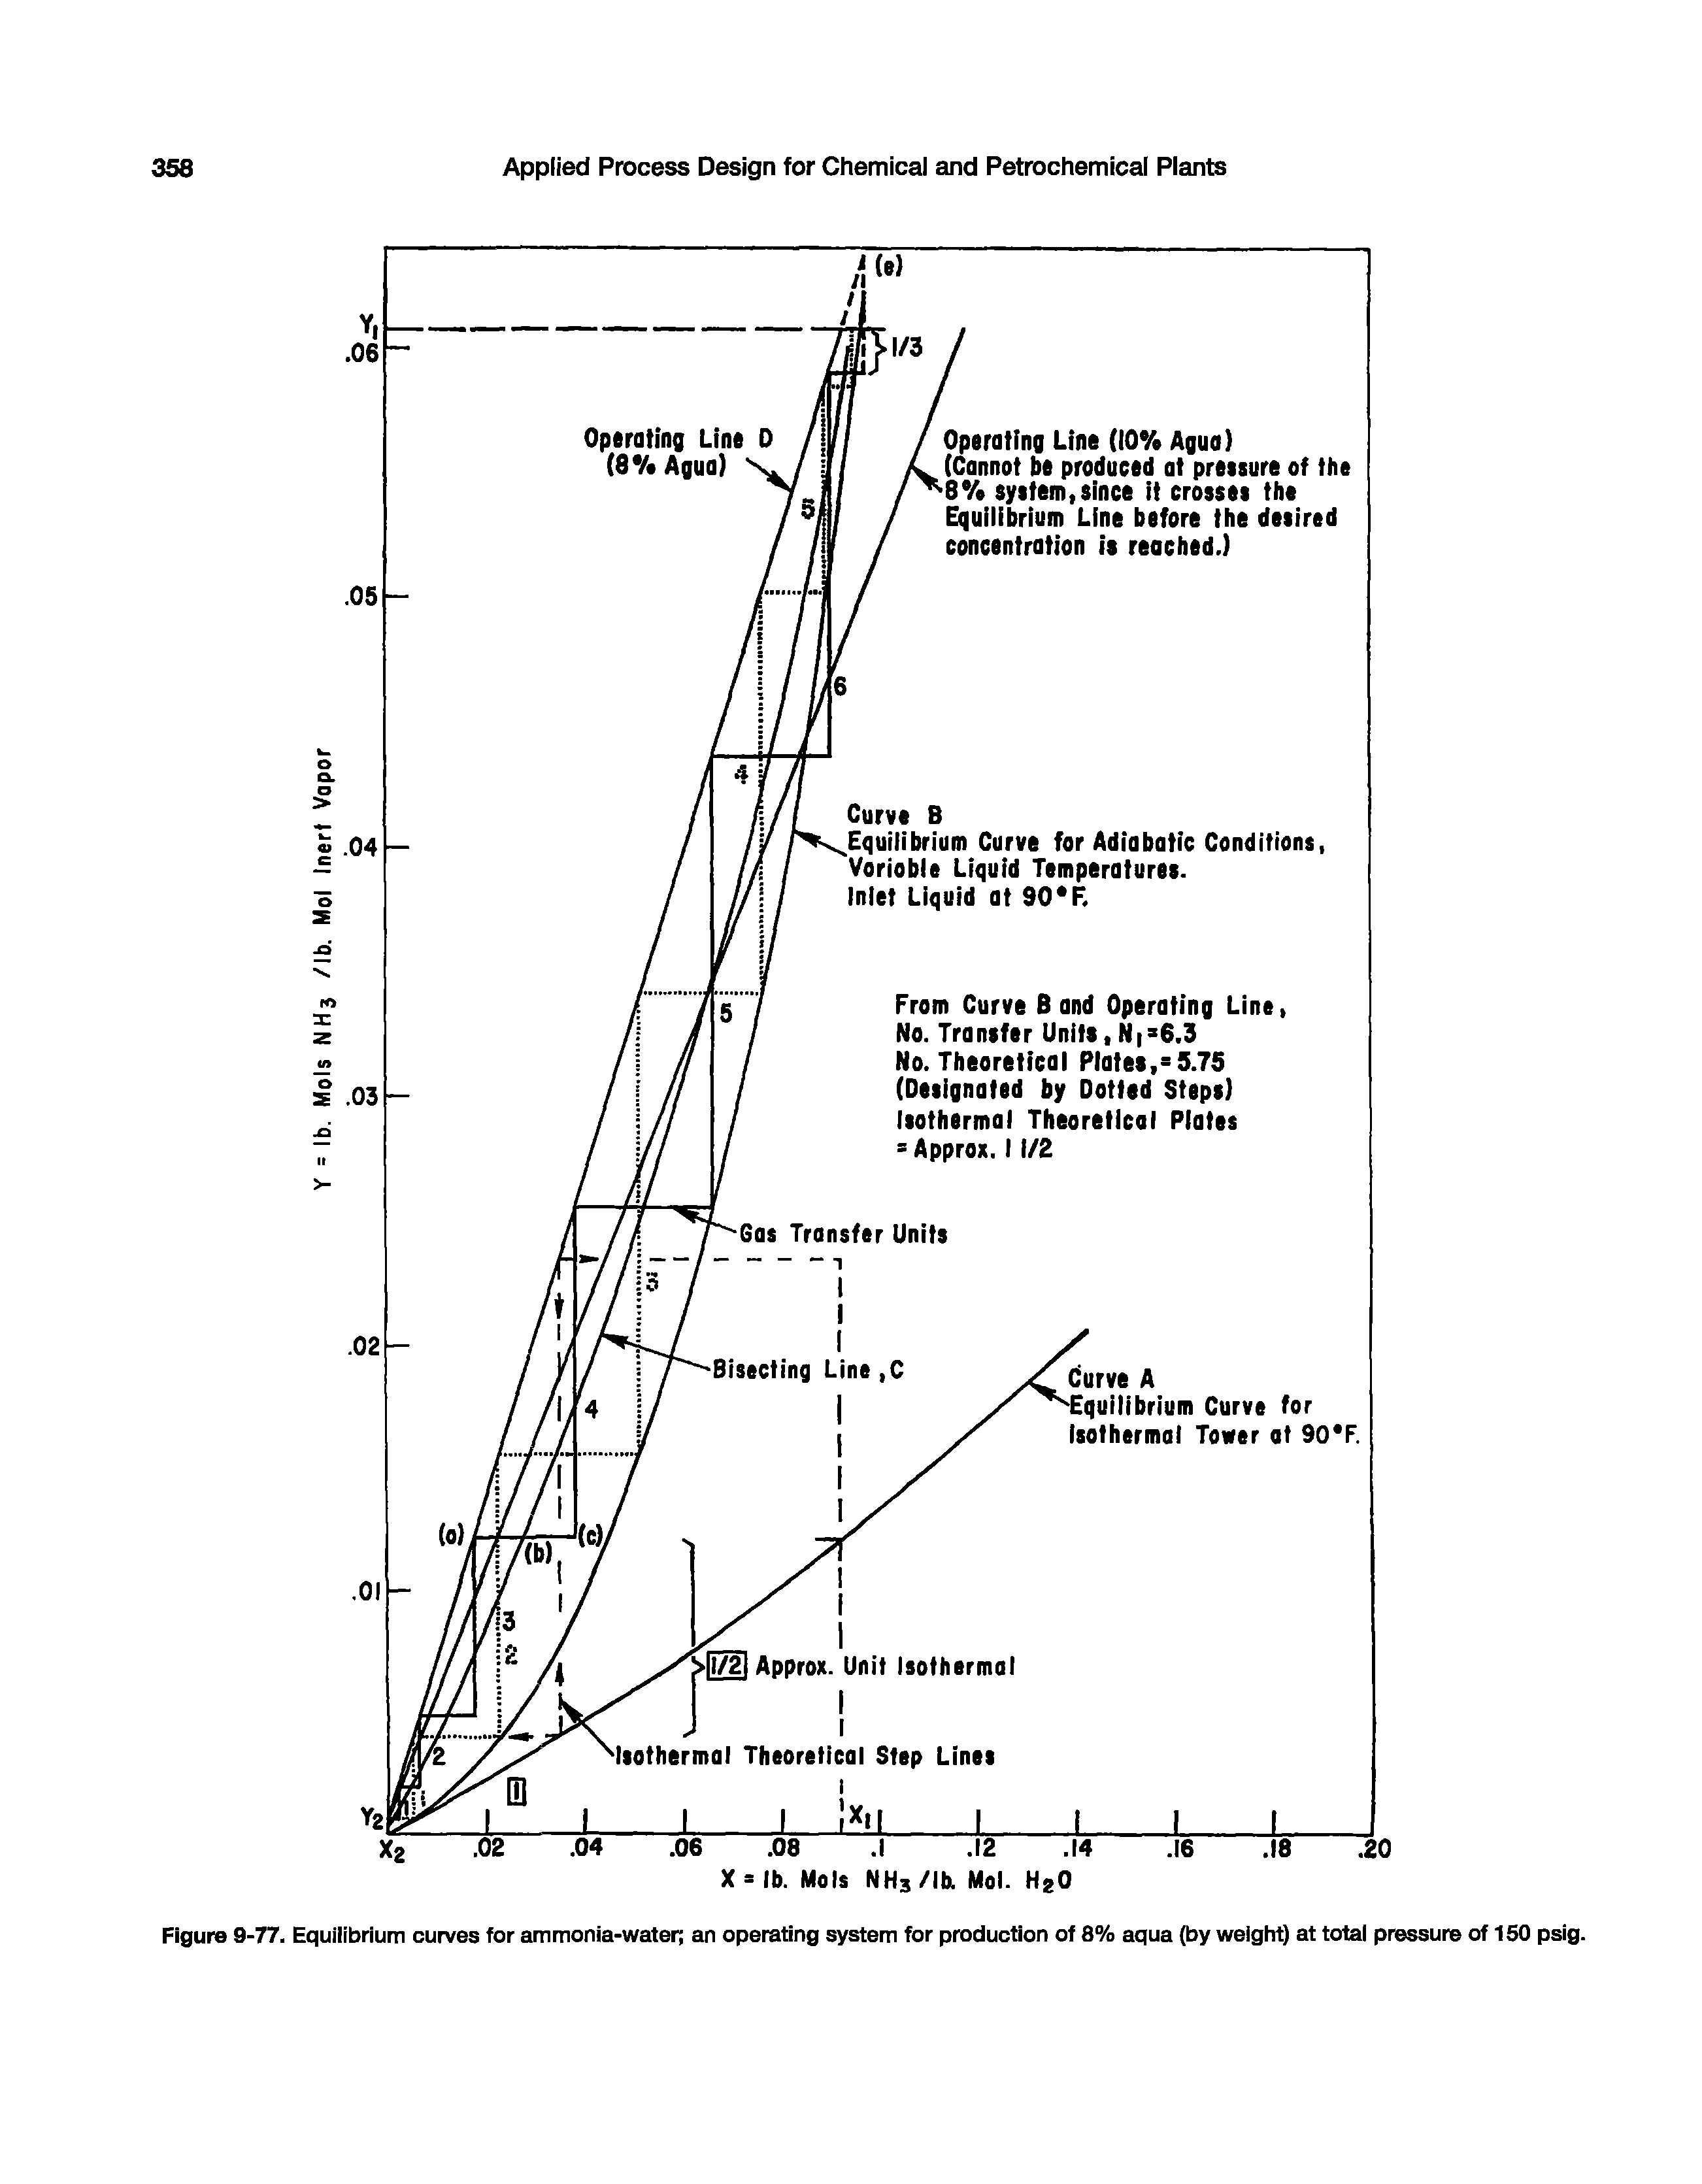 Figure 9-77. Equilibrium curves for ammonia-water an operating system for production of 8% aqua (by weight) at total pressure of 150 psig.